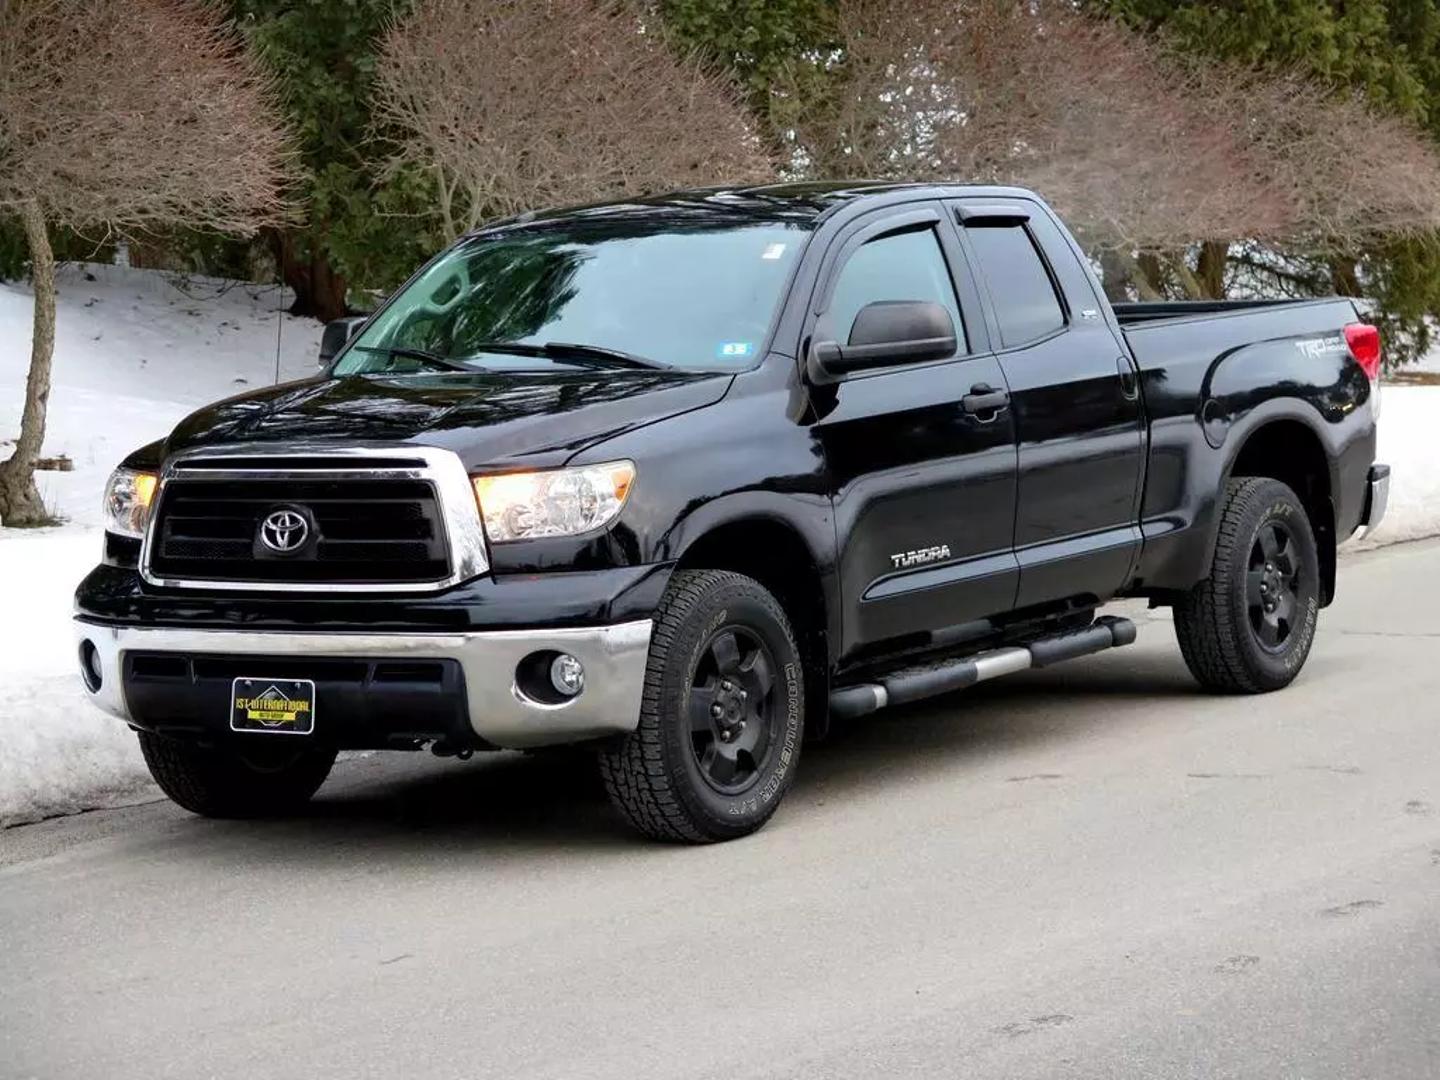 USED TOYOTA TUNDRA DOUBLE CAB 2012 for sale in Merrimack, NH 1st